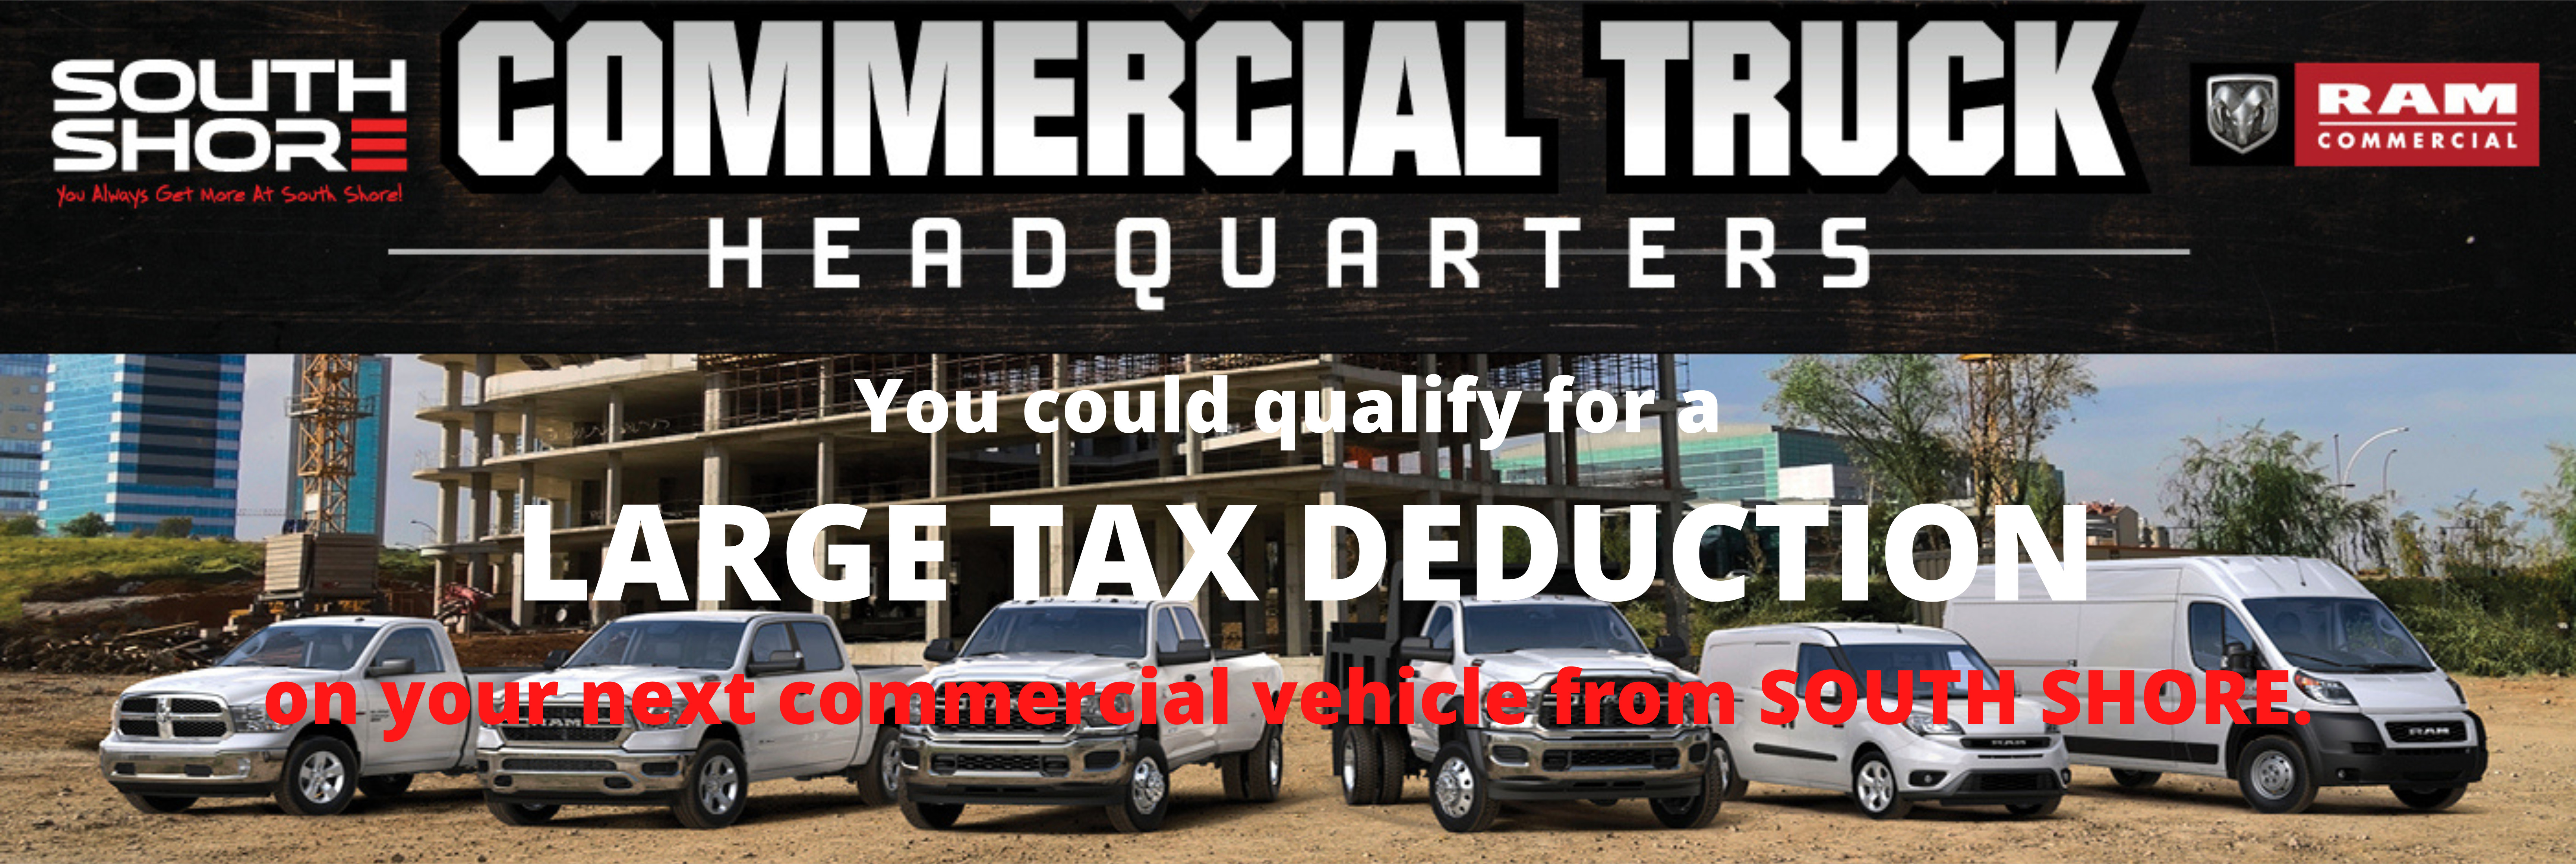 Tax Incentives available at South Shore Chrysler Dodge Jeep Ram of Inwood, NY